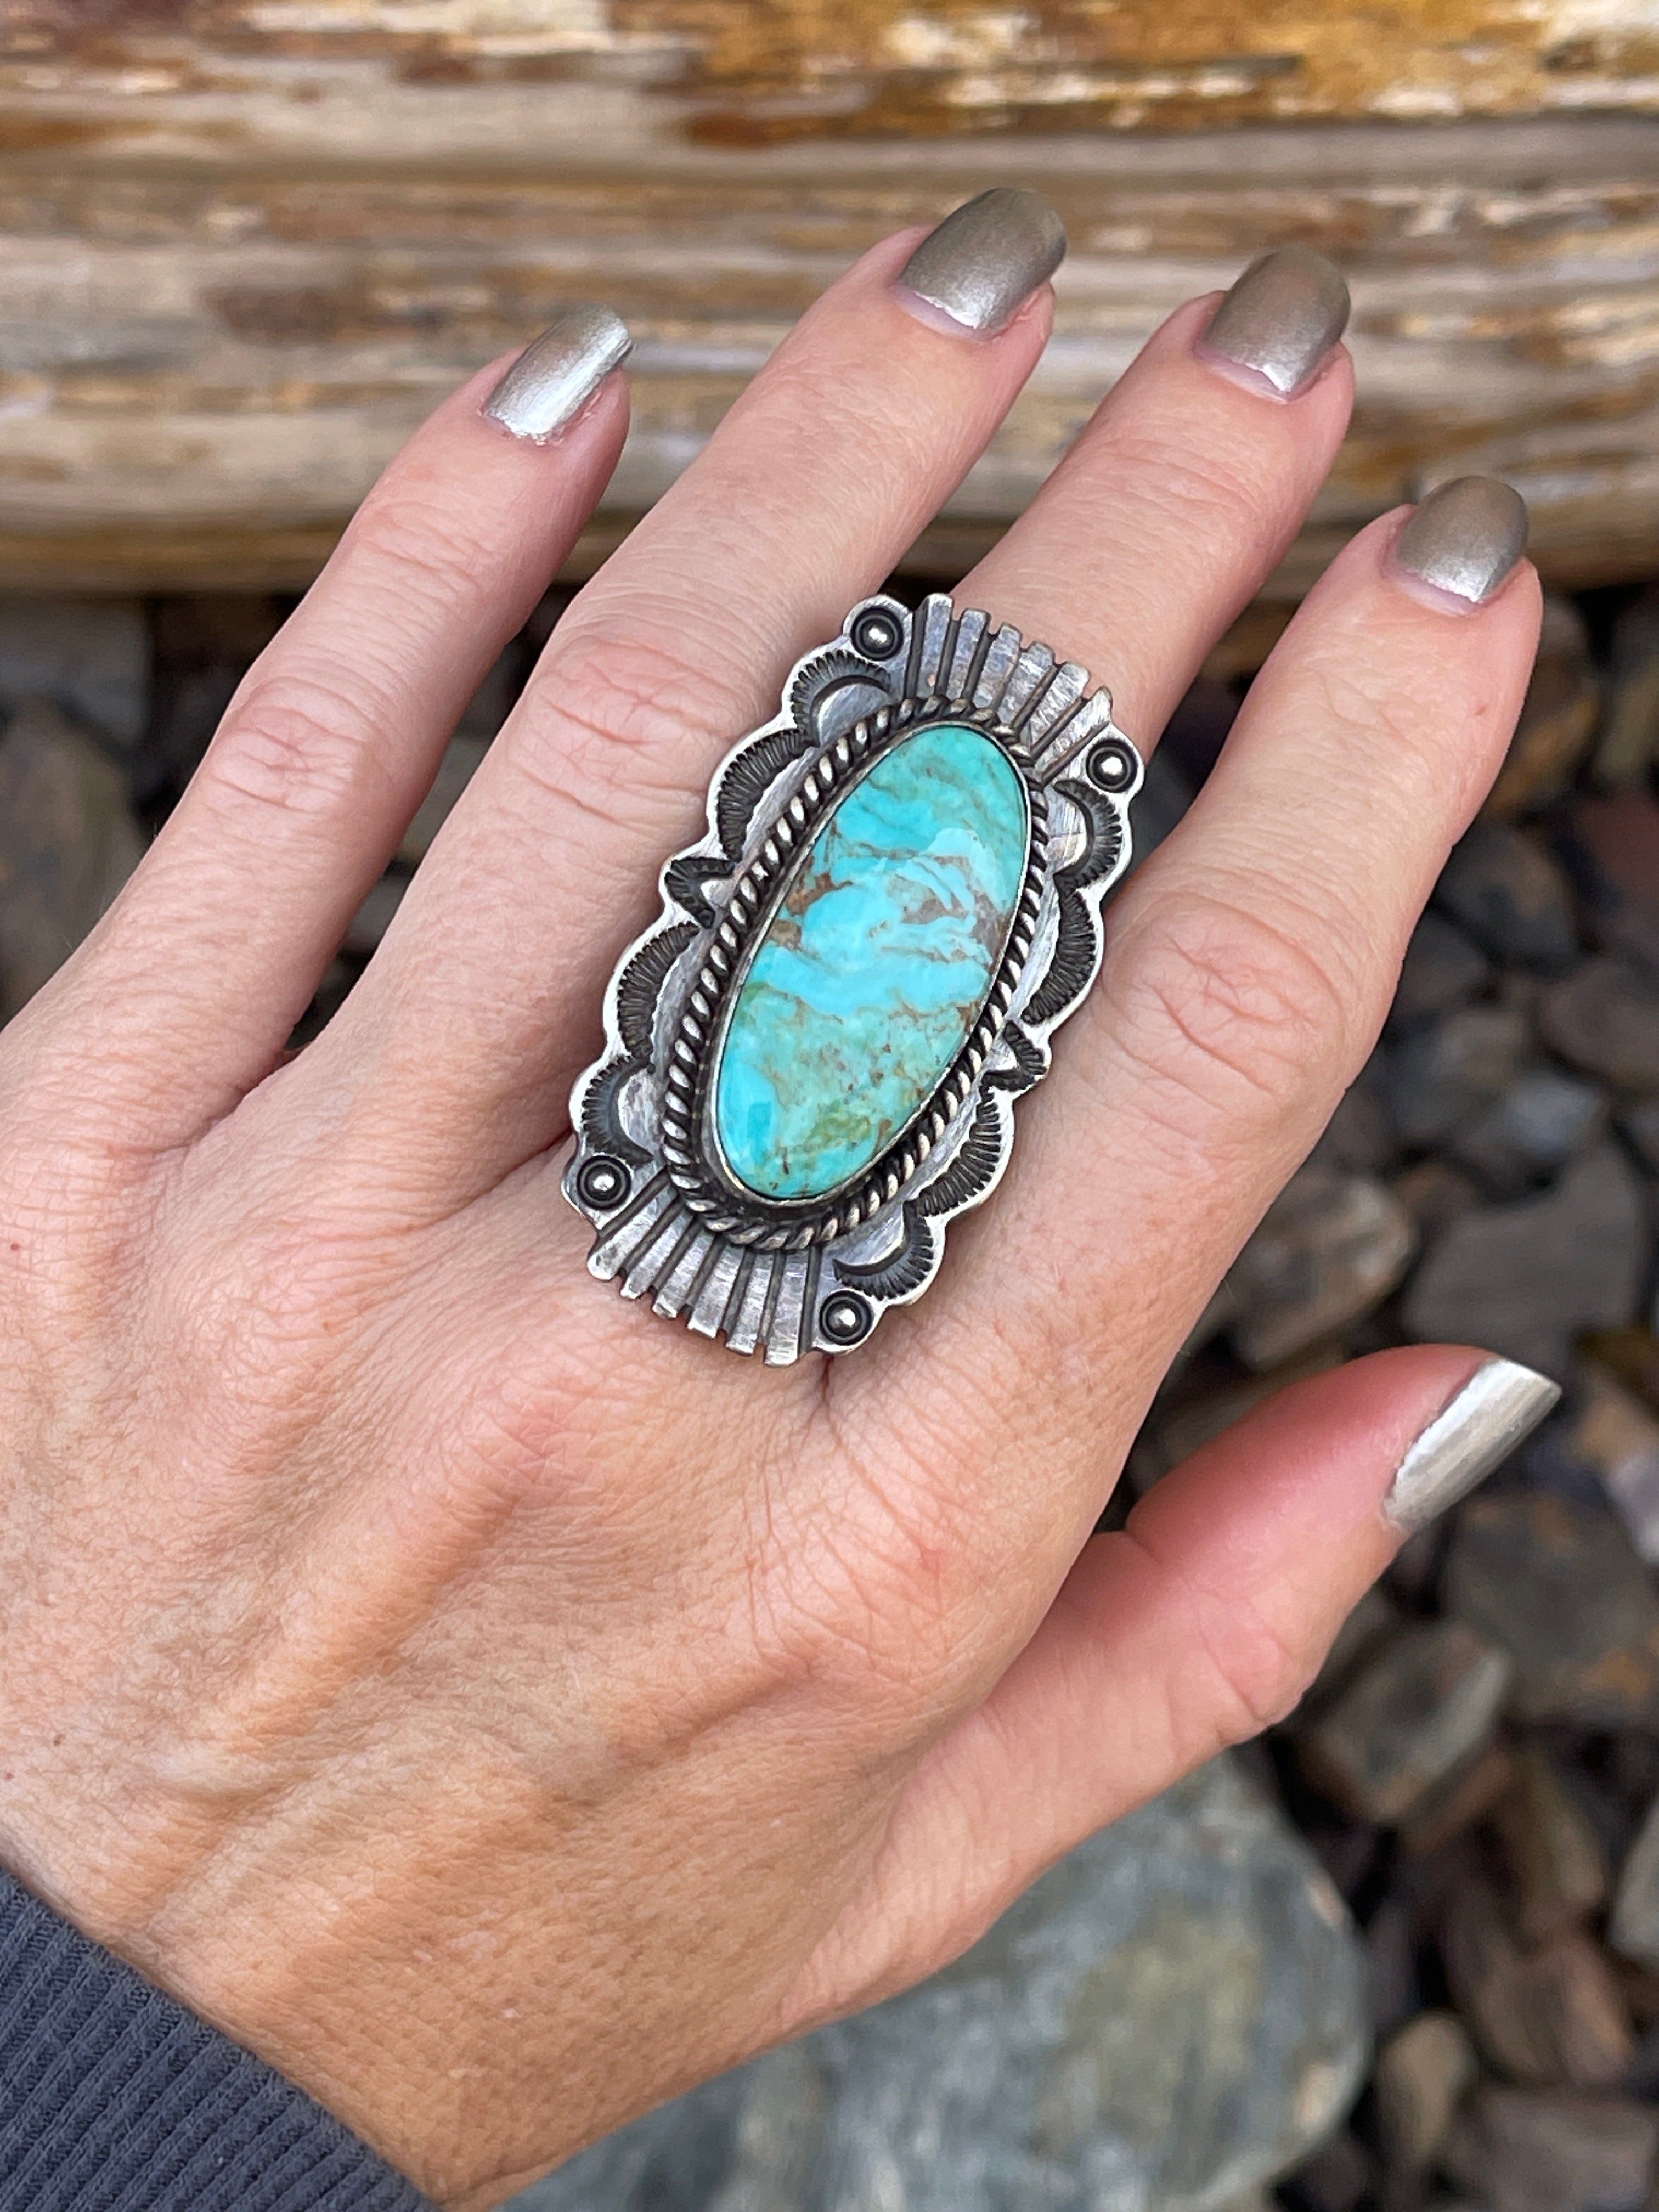 Large Handmade Solid Sterling Silver Kingman Turquoise Ring with Stamp Trim - Size 9 1/2